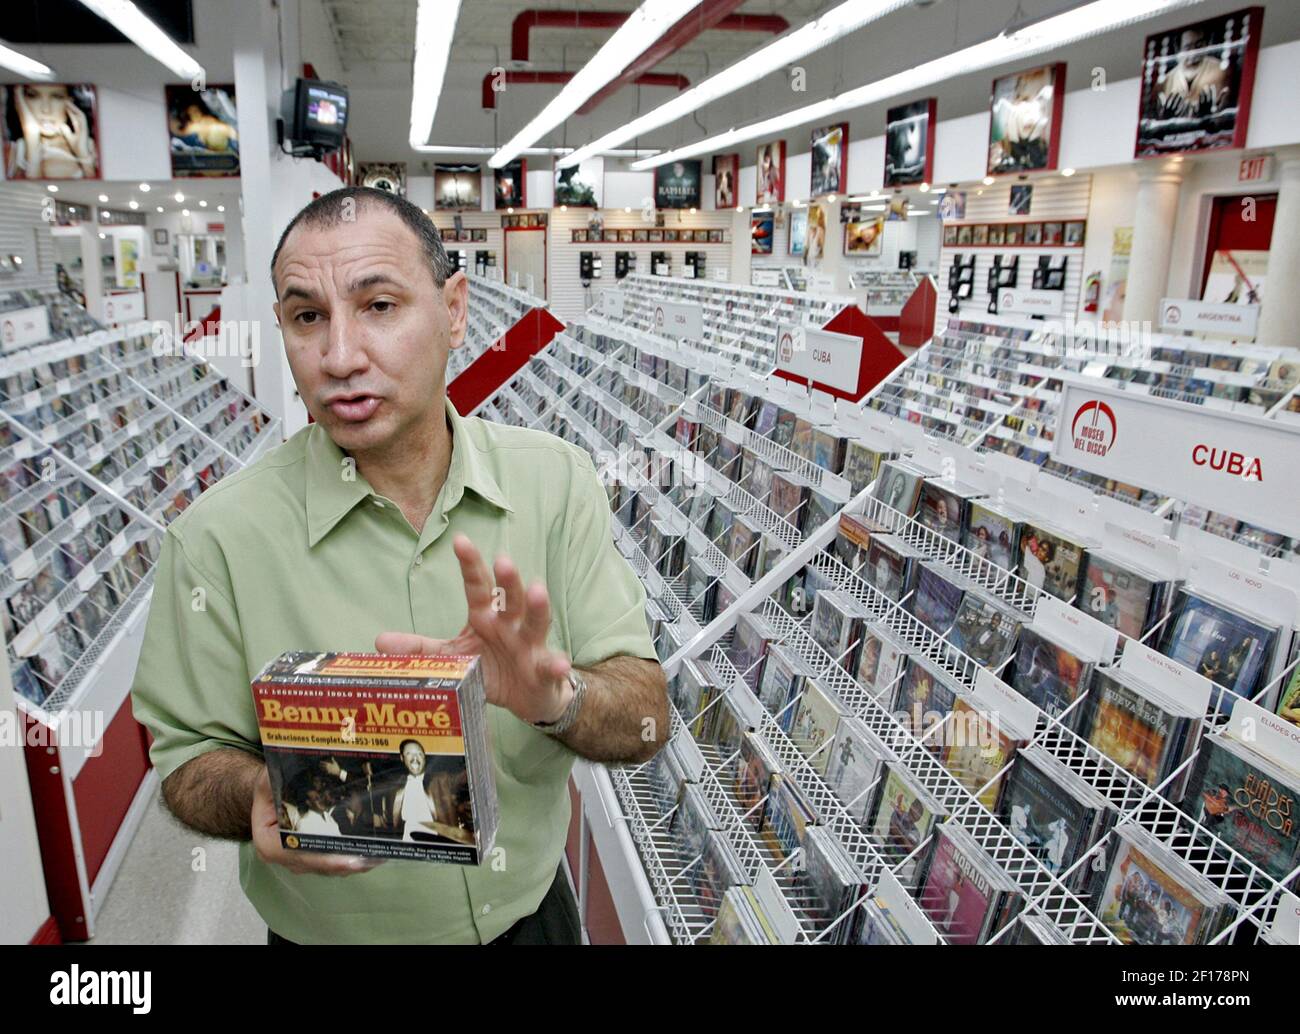 I love what I do,': And I have what no one else has, says Hinsul Lazo,  owner of Museo del Disco, a large independent music store, in Southwest  Miami-Dade, Florida. (Photo by